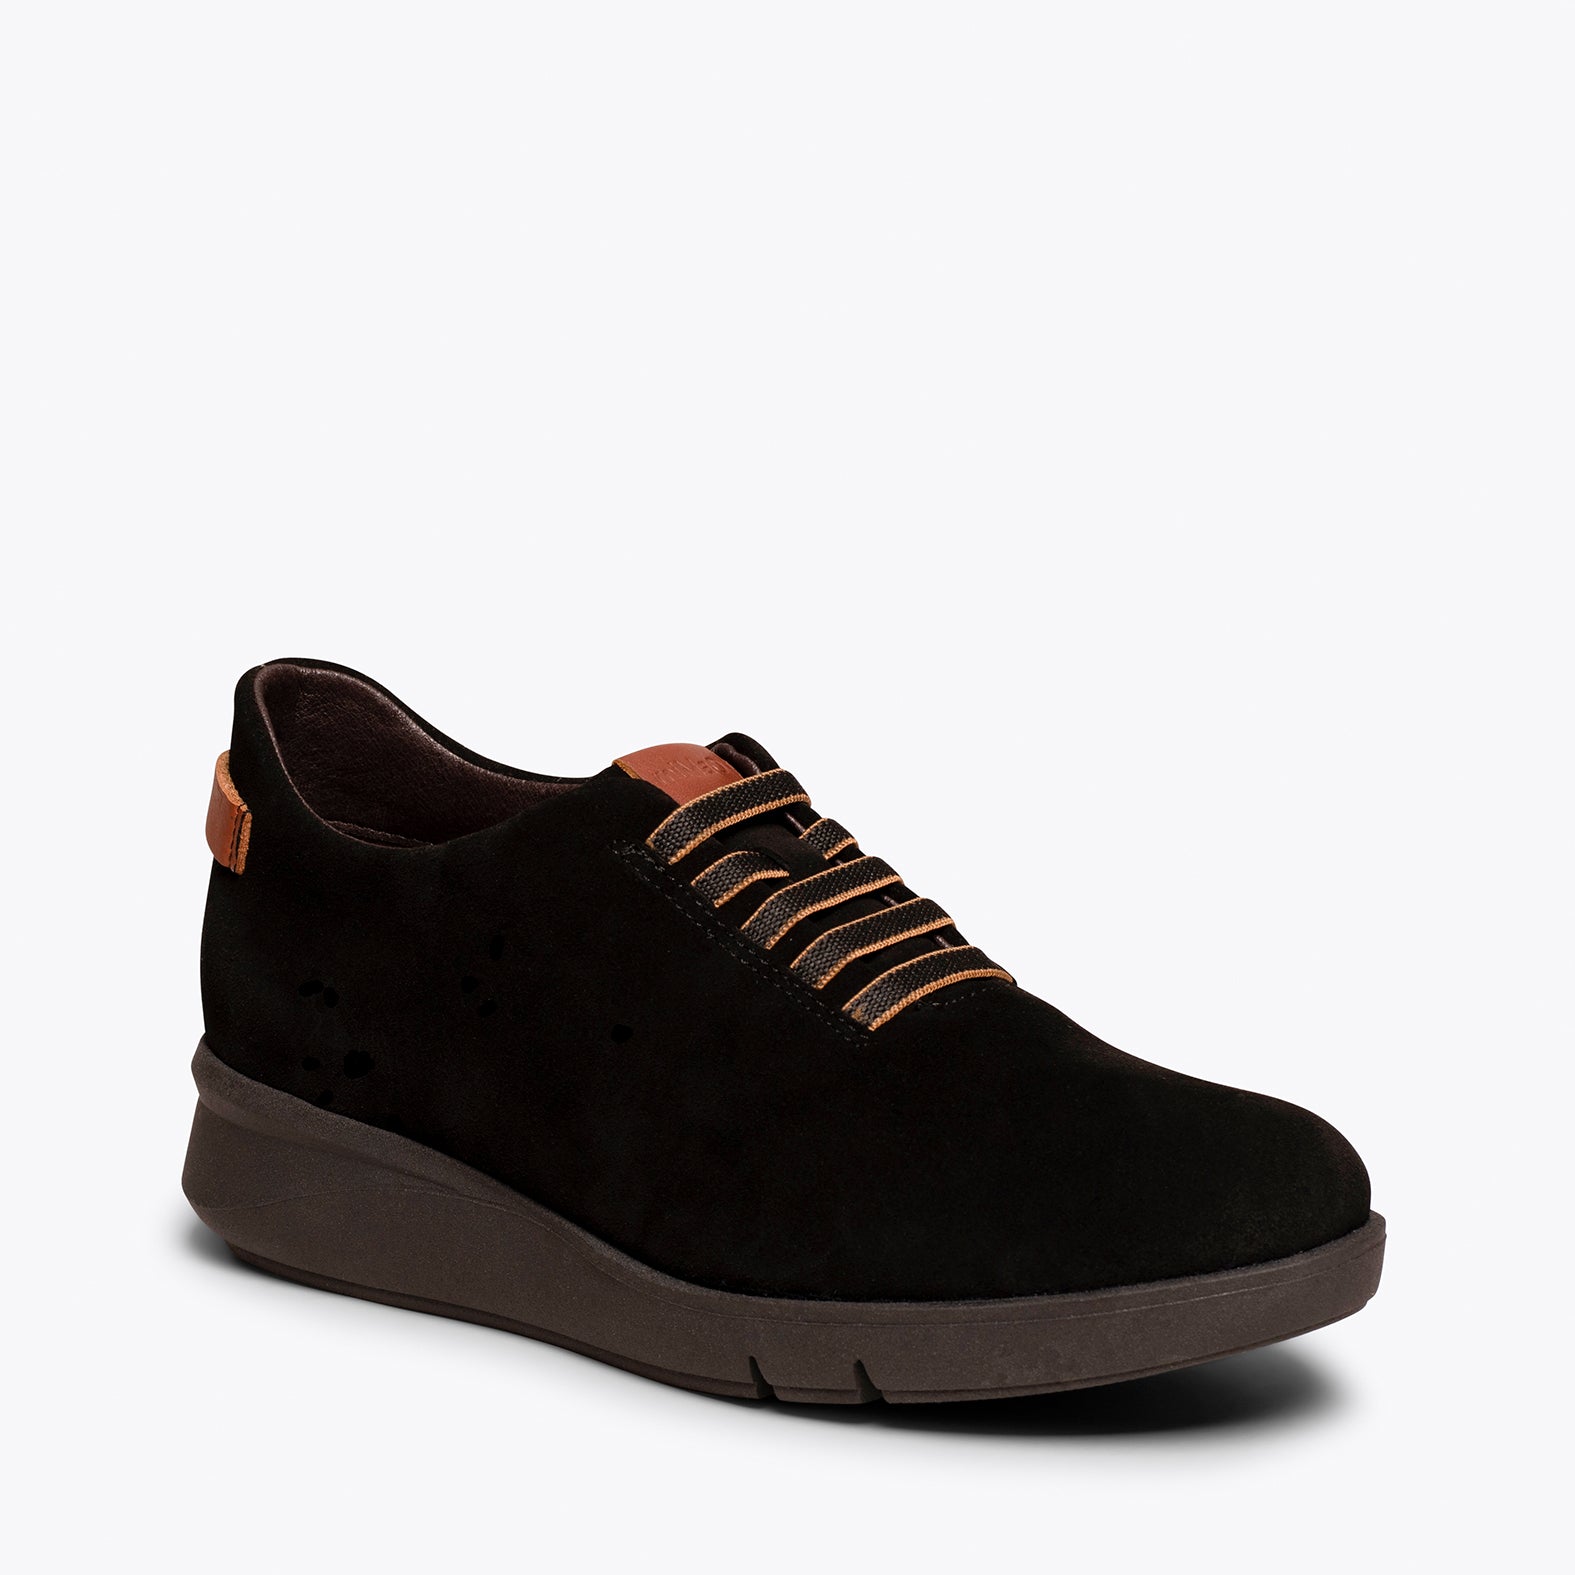 FLY – BLACK casual sneaker with elastic laces